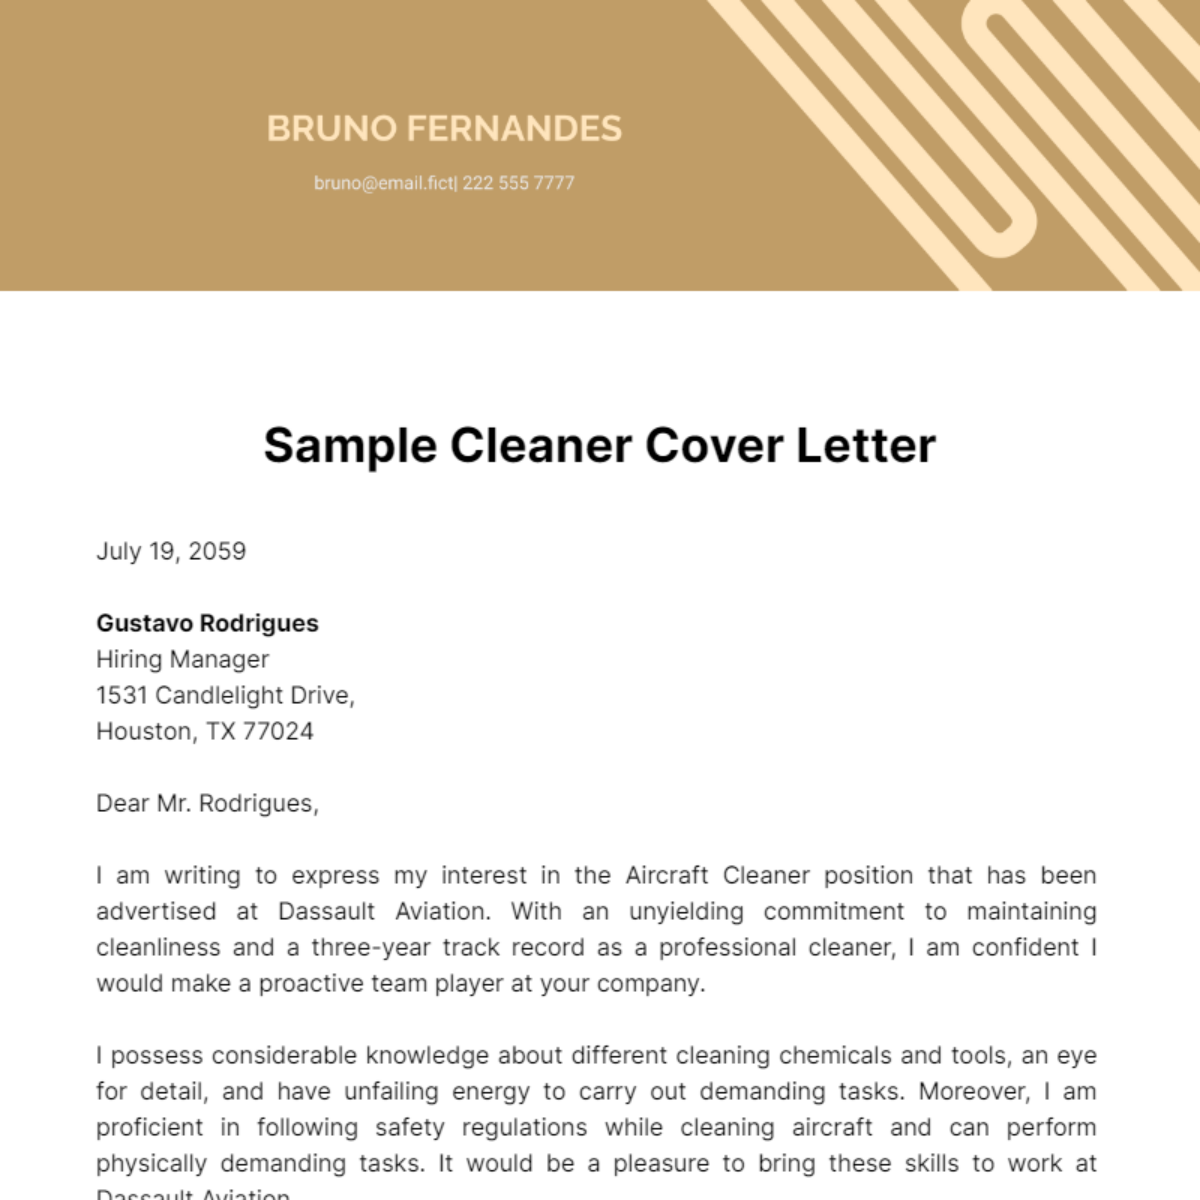 Sample Cleaner Cover Letter Template